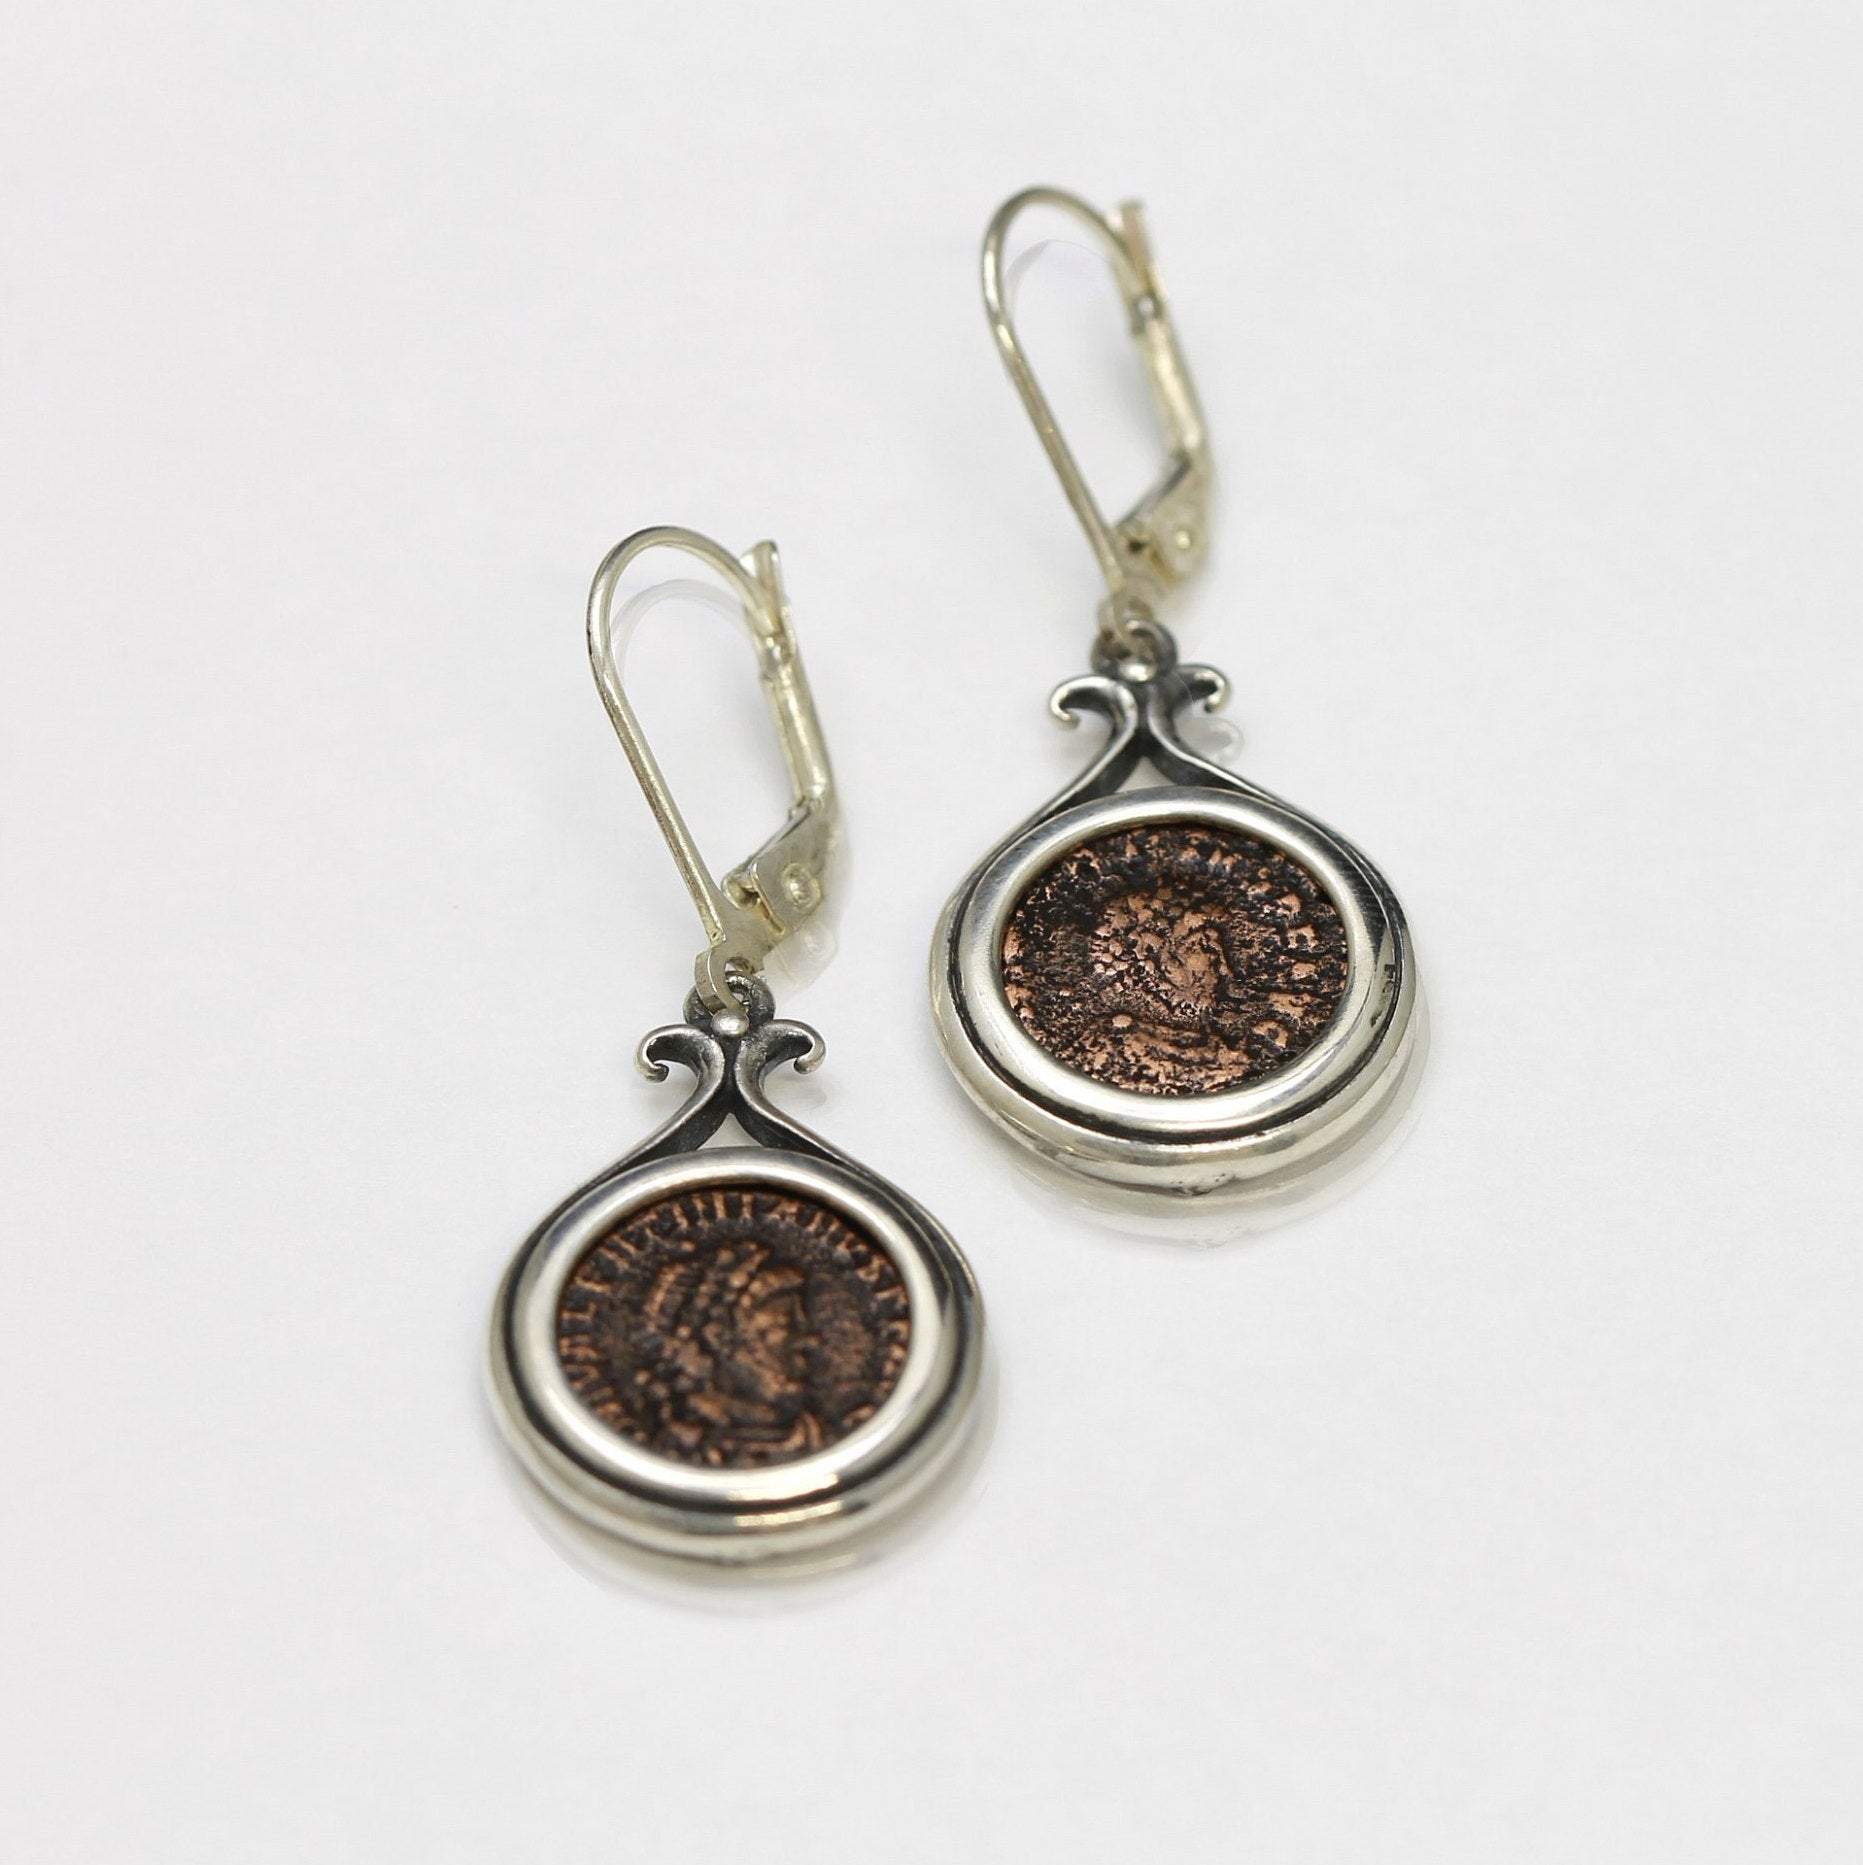 Roman Coin Silver Earrings, Genuine Ancient Coins, with Certificate 2059 - Erez Ancient Coin Jewelry 